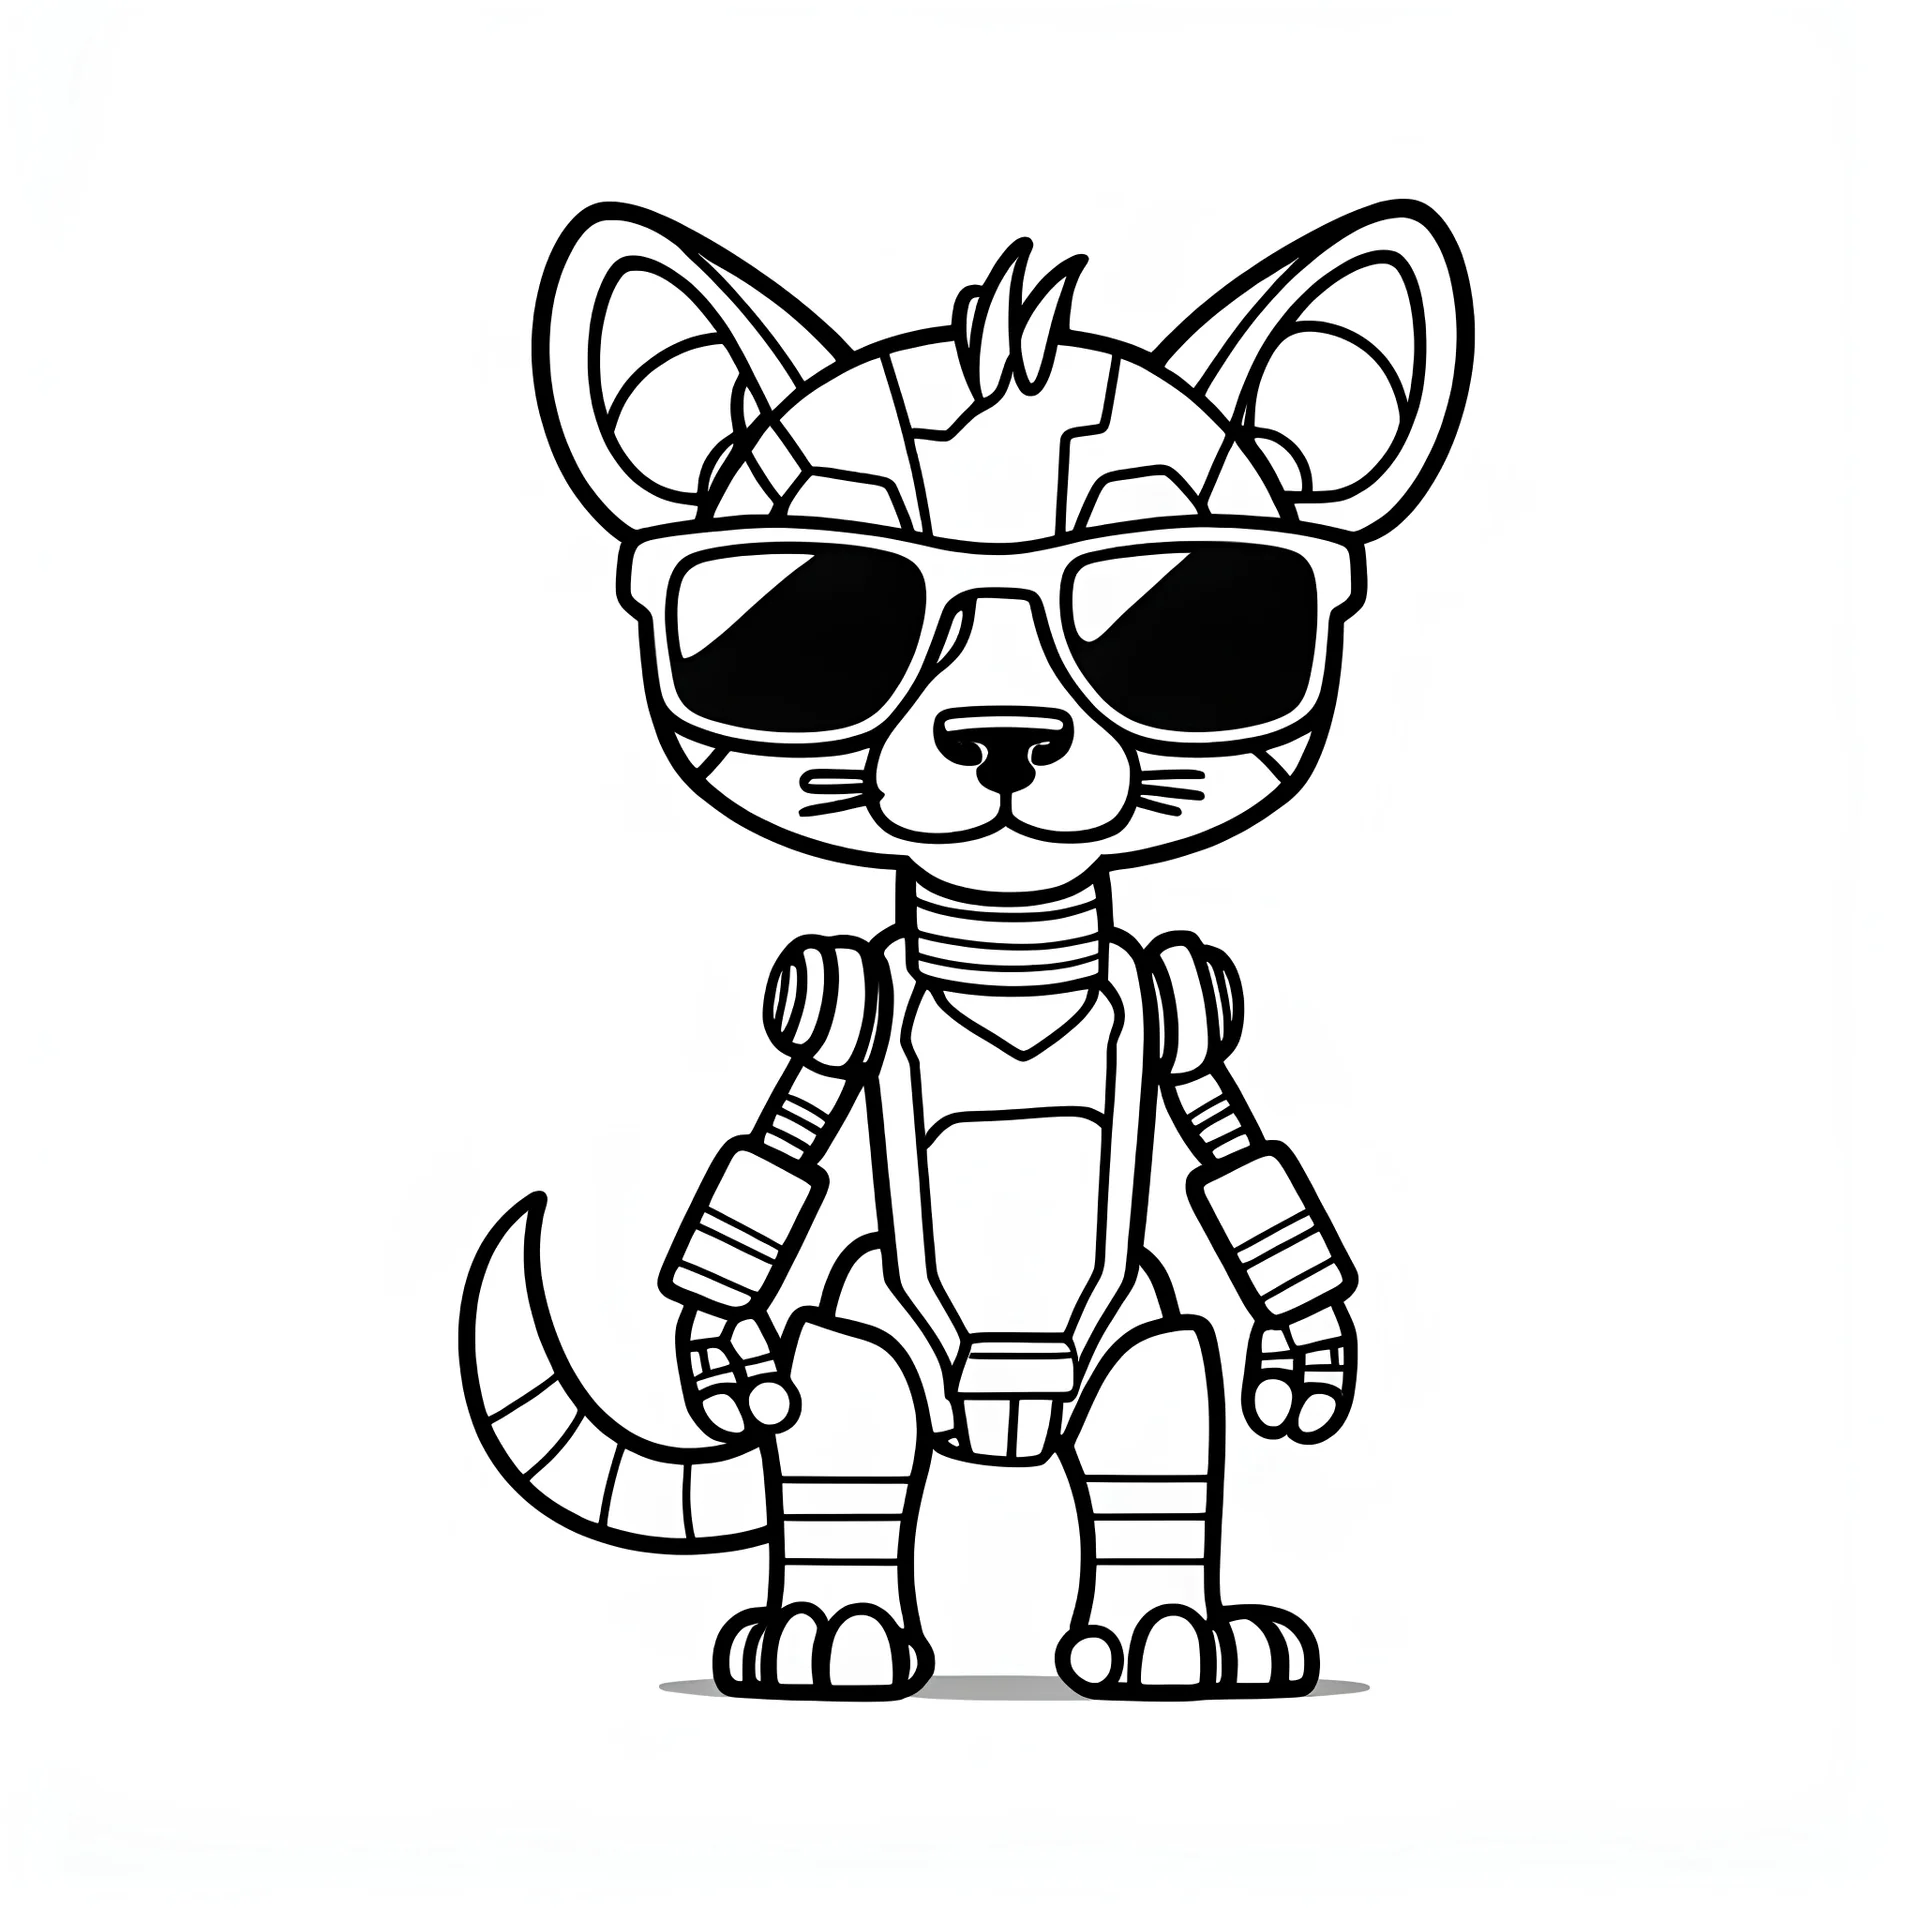 coloring page, no shadow, no shading , minimalistic art , High Quality Pixels a Cute and Playful kawaii Tasmanian Tiger robot, add sunglass , thick line , blod line, very low details, with white background, simple coloring page